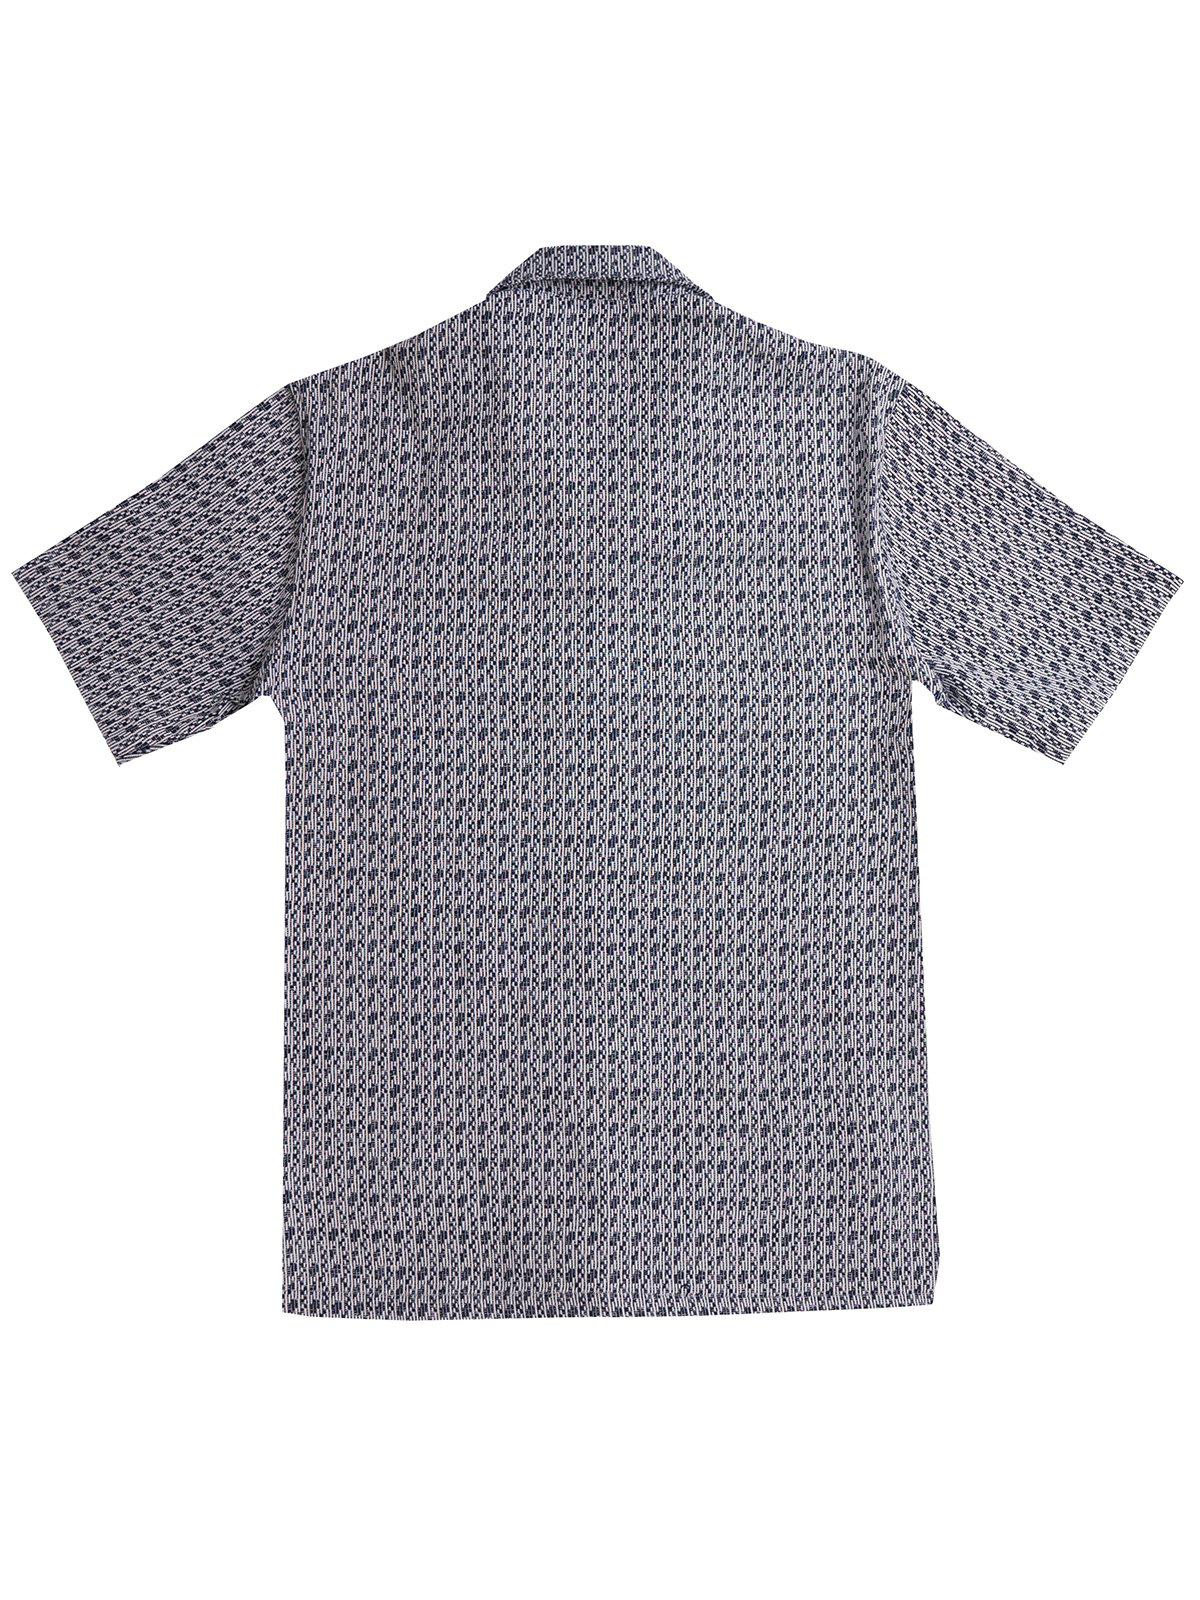 Contentment. Relaxed Textural Weave Shirt - MORE by Morello Indonesia